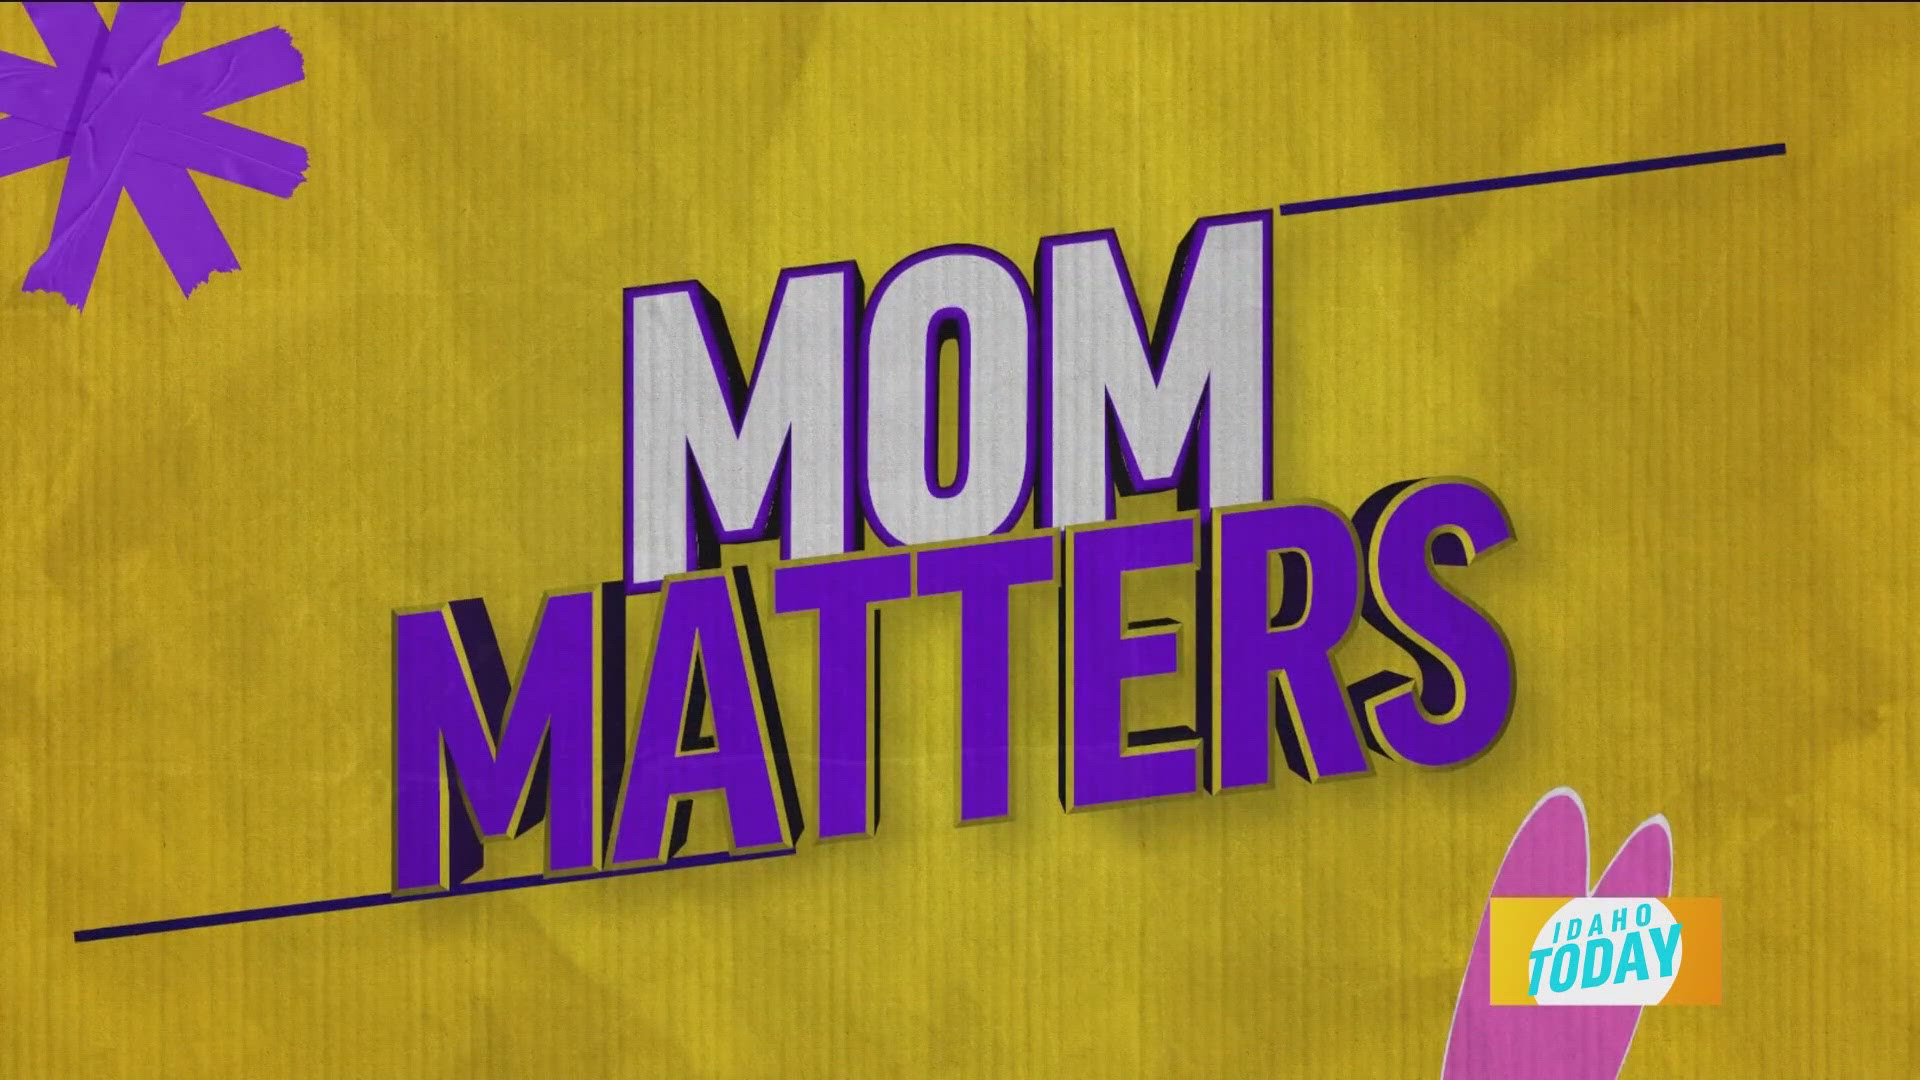 Mom Matters on Idaho Today is a new series created by moms for moms as a safe place to share, collaborate and support one another.